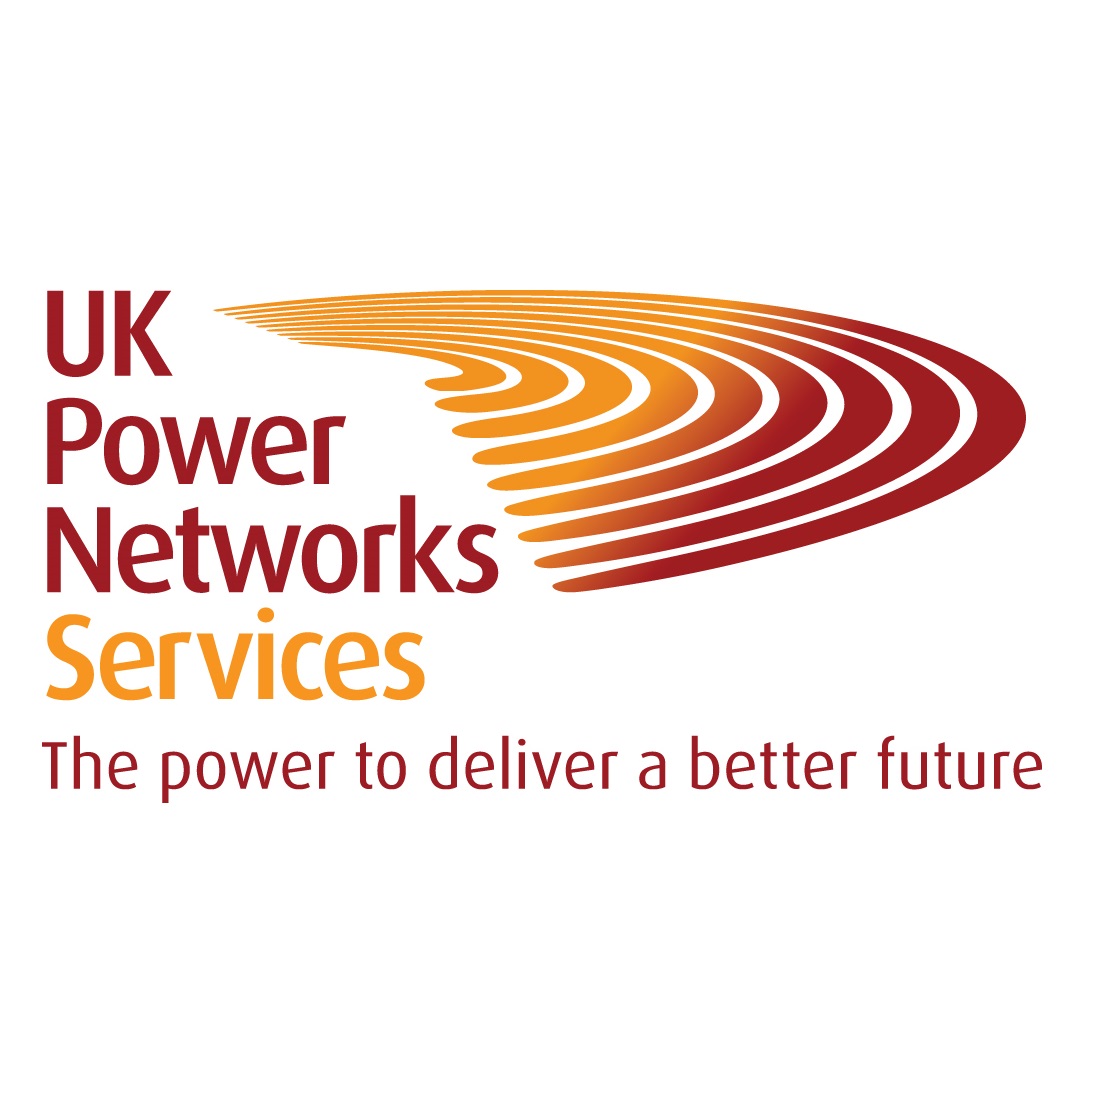 UK Power Networks Services